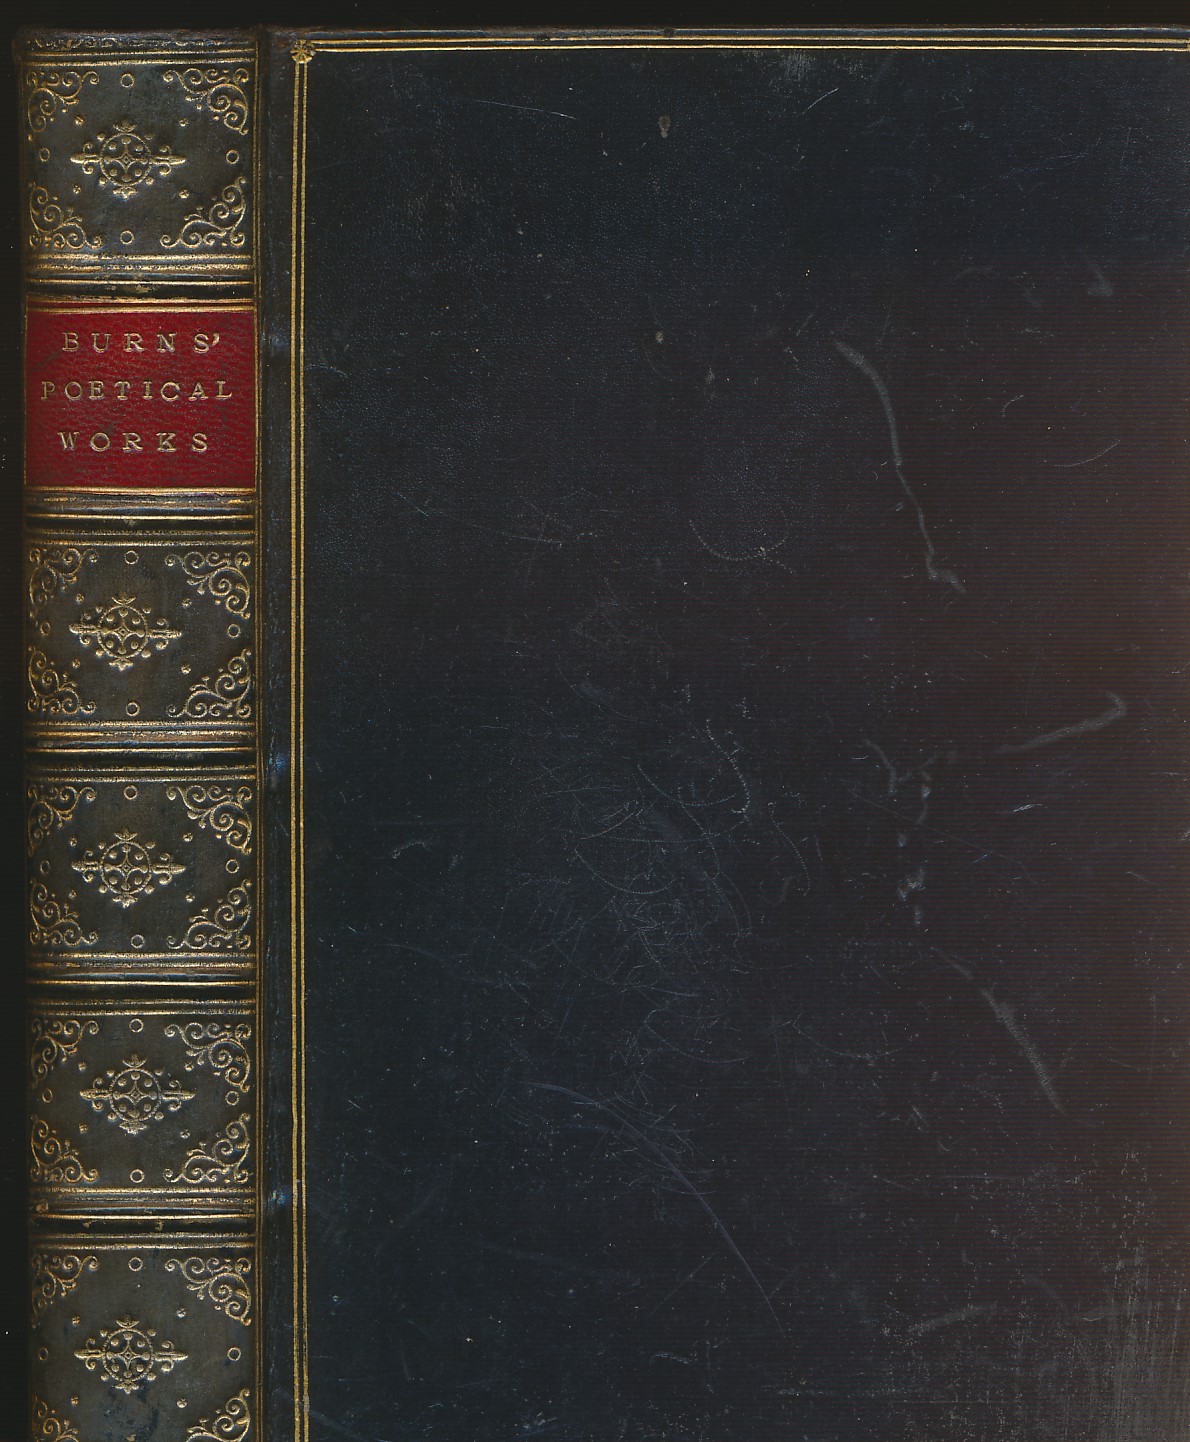 The Complete Works of Robert Burns. Poems Songs and Letters. The Globe Edition.